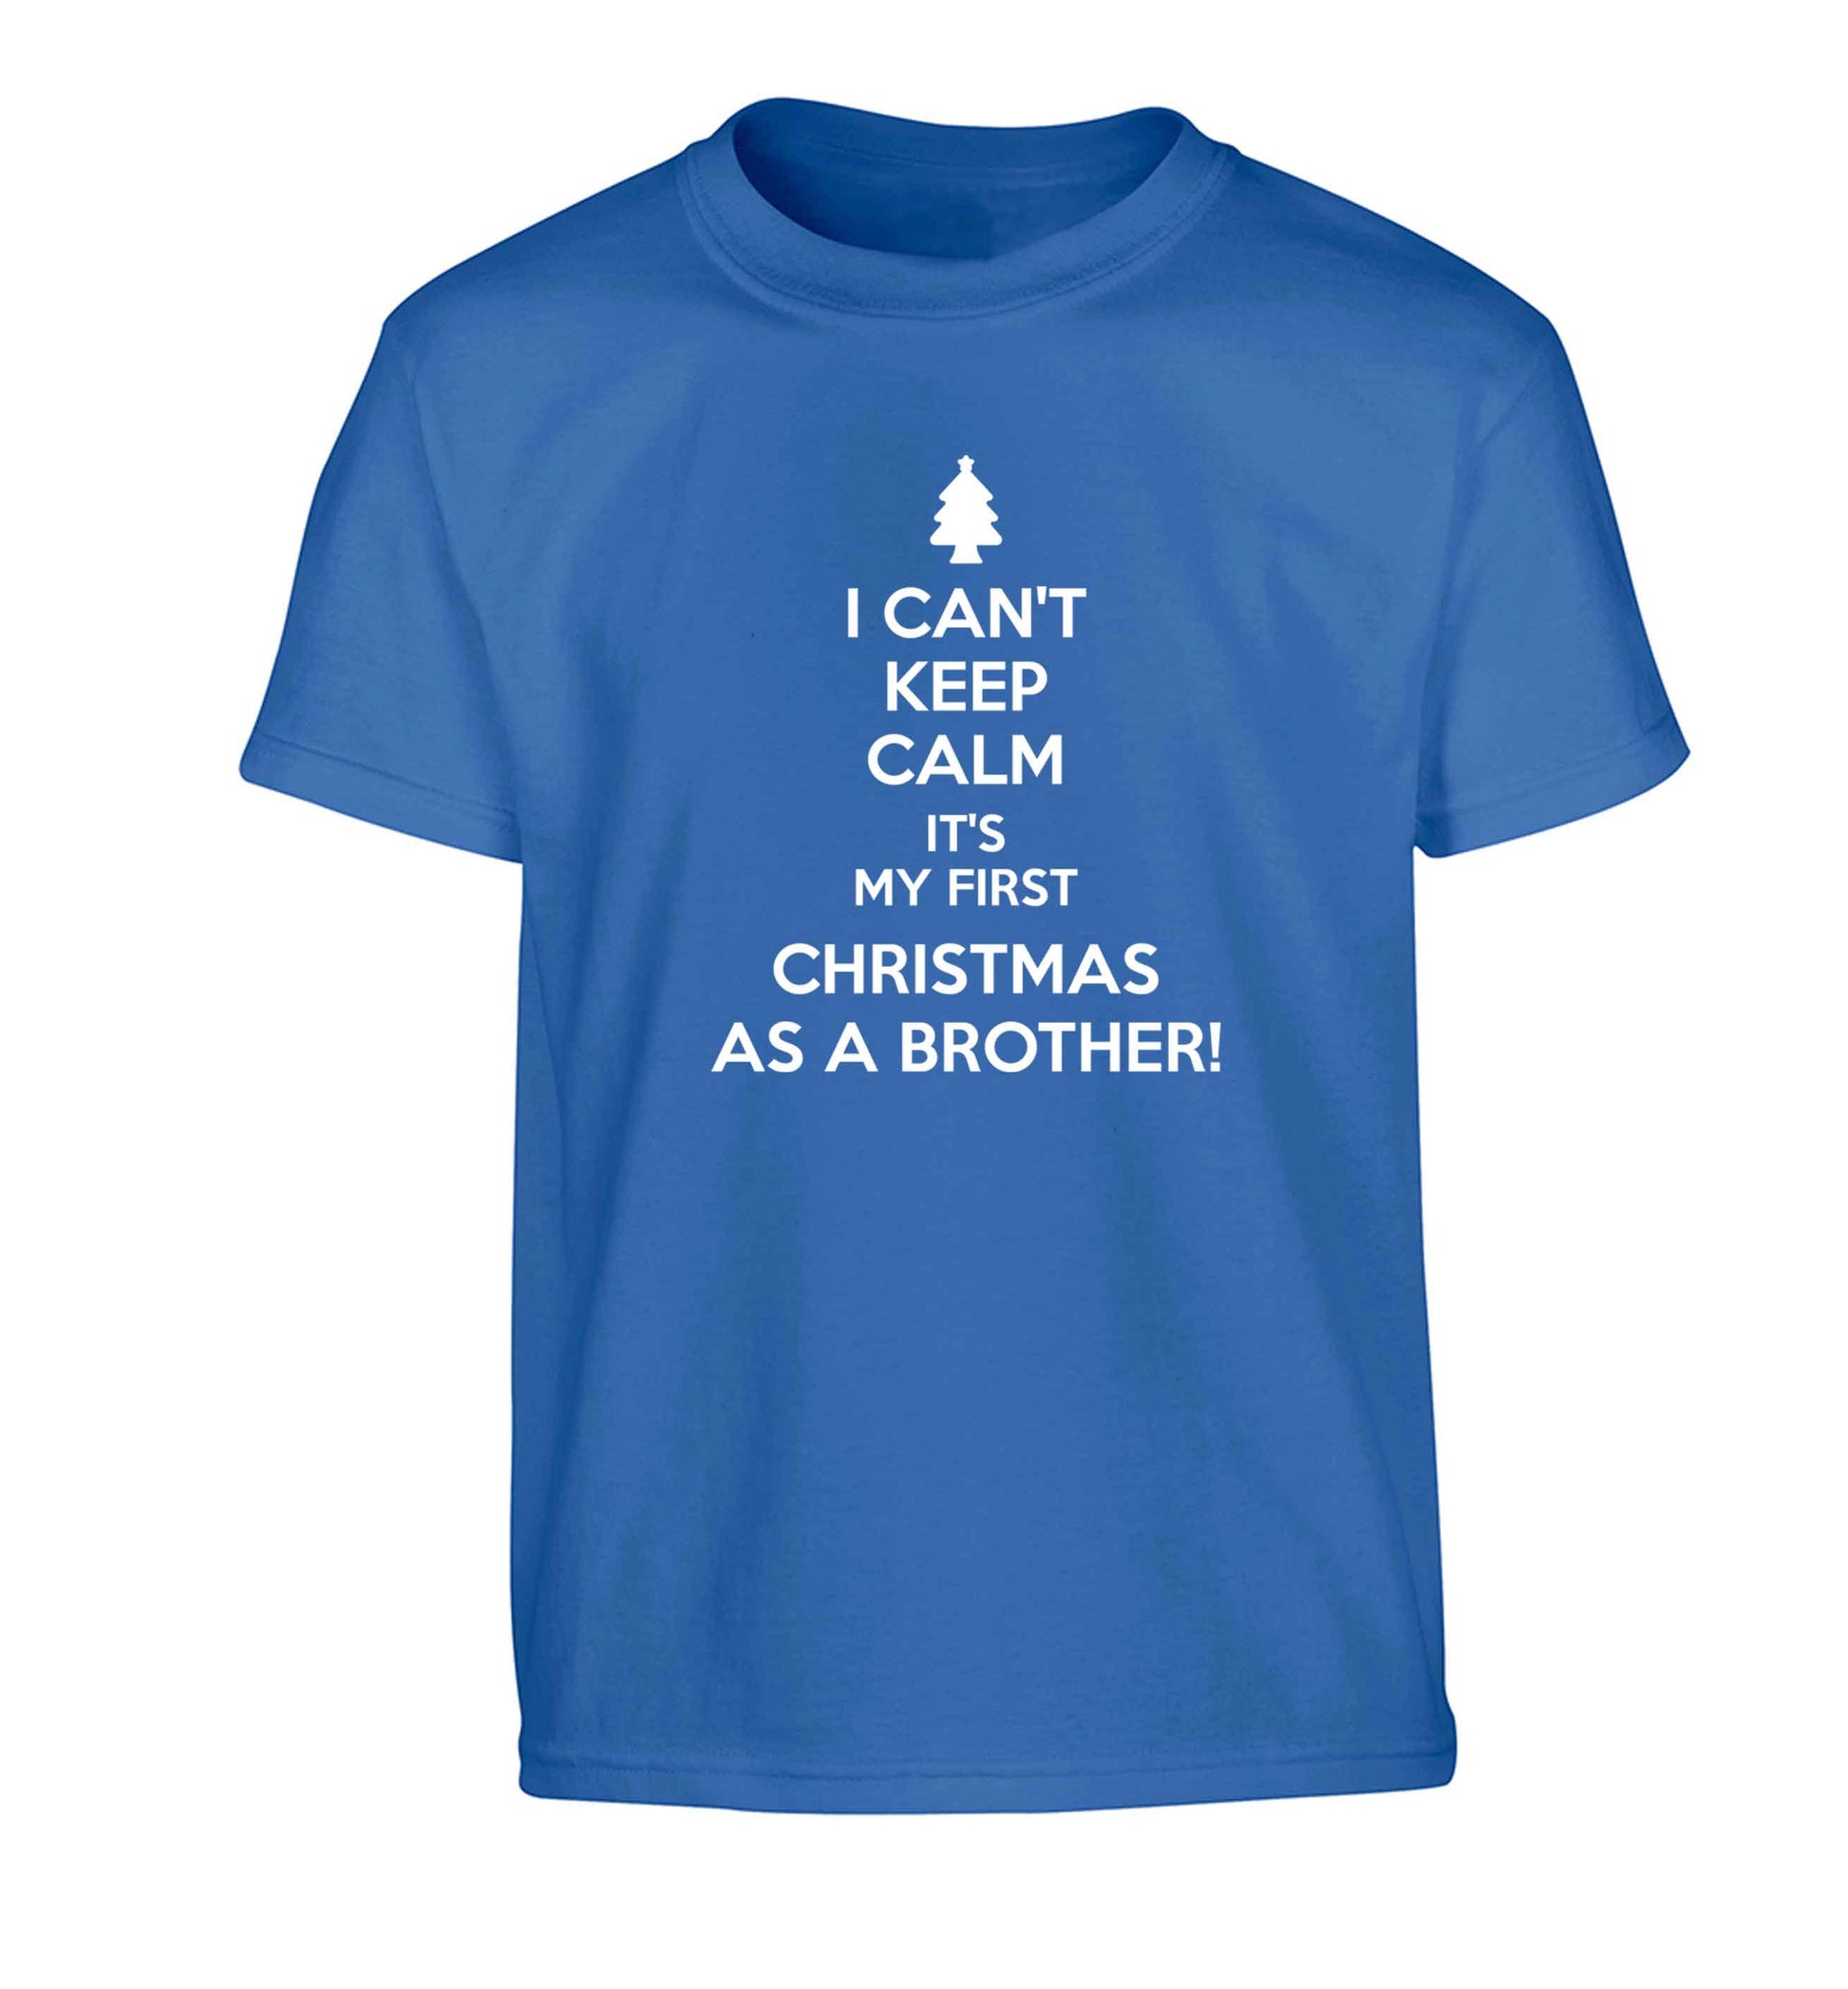 I can't keep calm it's my first Christmas as a brother! Children's blue Tshirt 12-13 Years